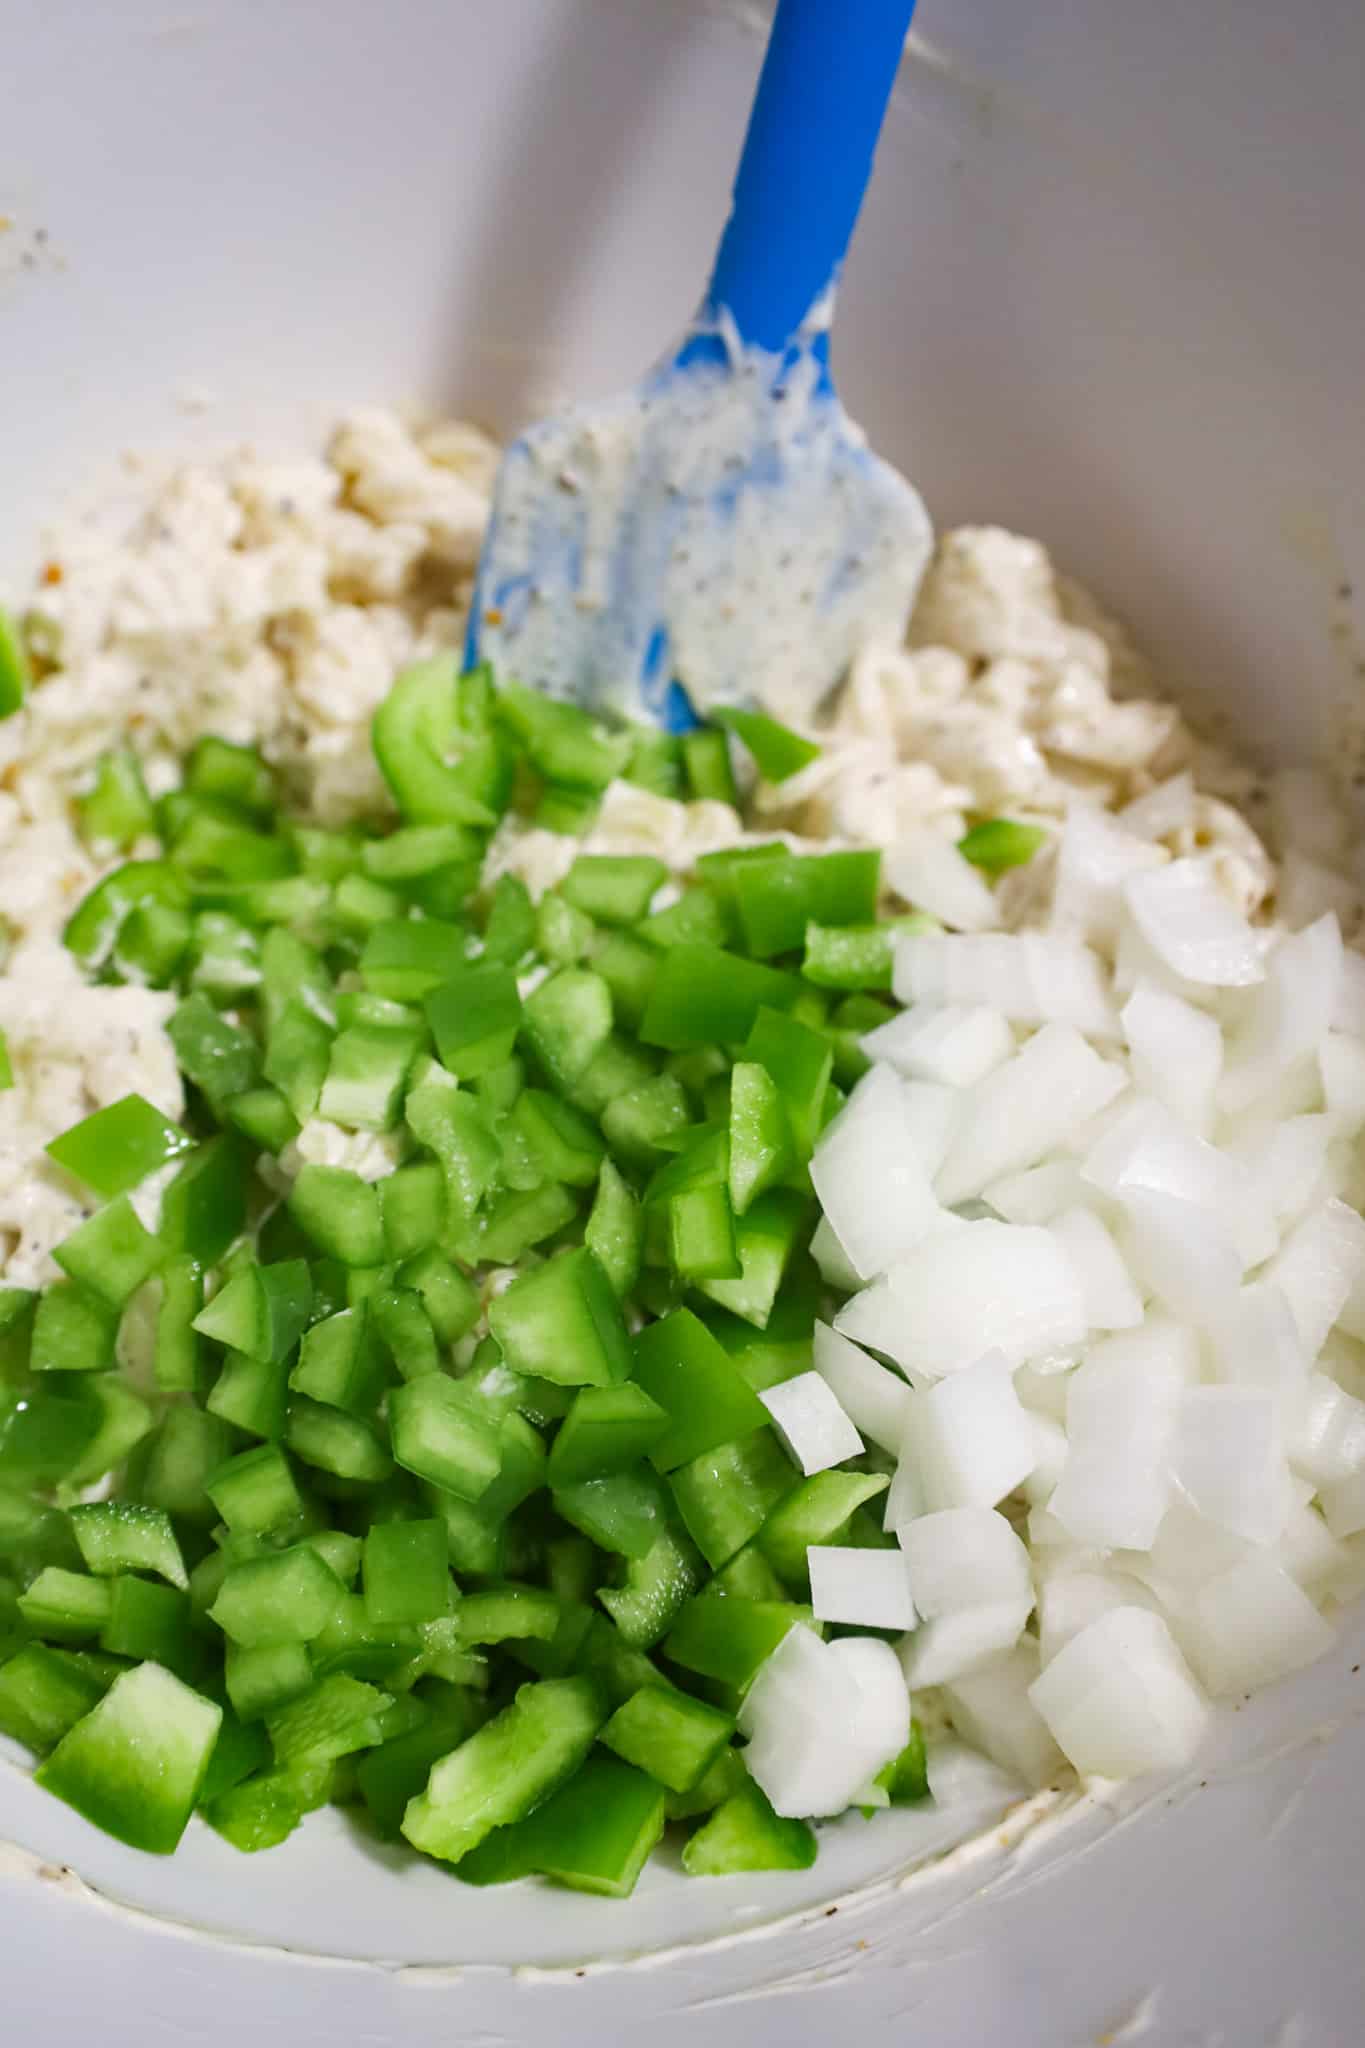 diced green peppers and onion on top of mayo coated noodles in a mixing bowl